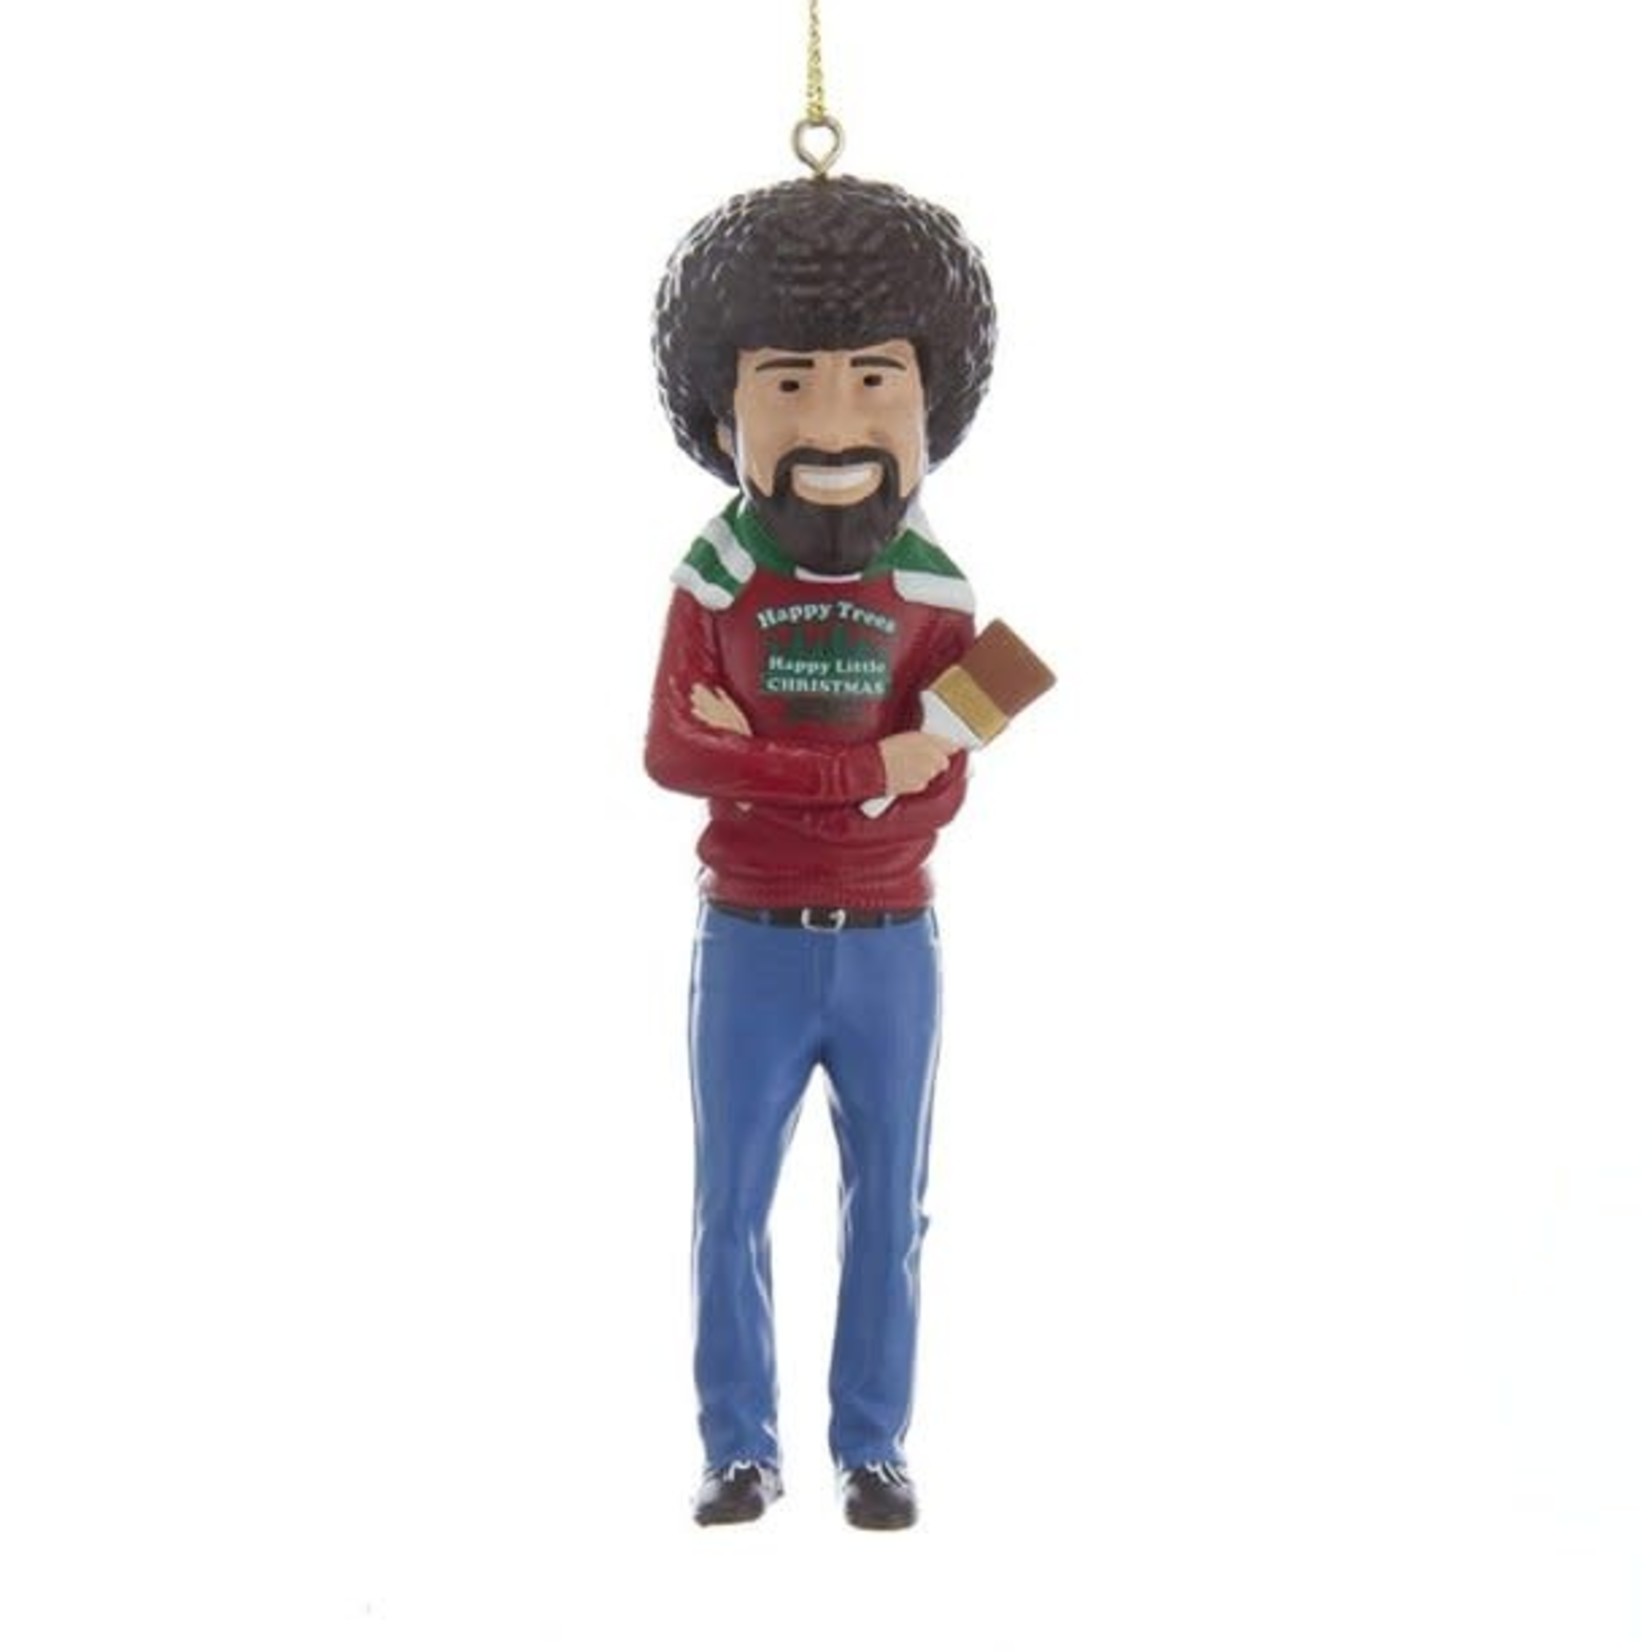 Ornament - Bob Ross Standing With Paintbrush